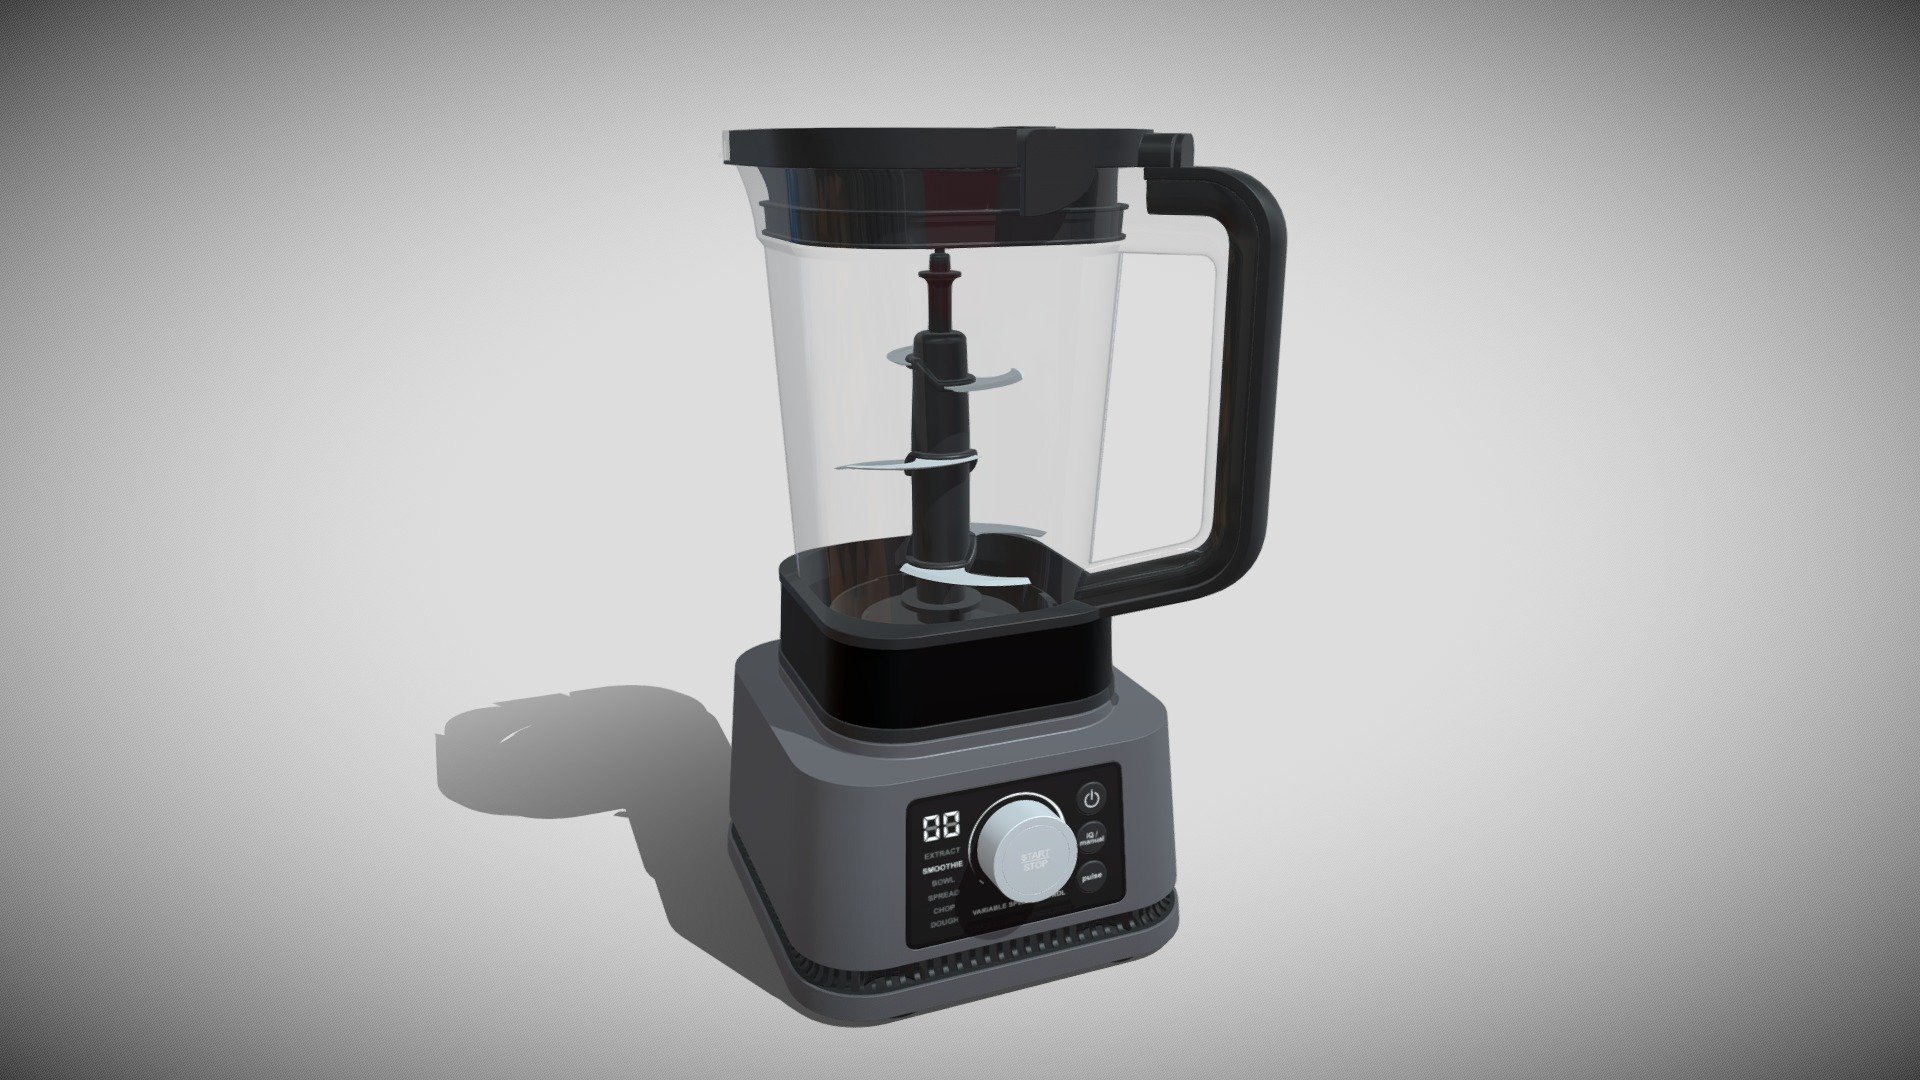 Detailed model of a Ninja Foodi Power Blender And Processor, modeled in Cinema 4D.The model was created using approximate real world dimensions.

The model has 74,581 polys and 74,845 vertices.

An additional file has been provided containing the original Cinema 4D project file, textures and other 3d export files such as 3ds, fbx and obj 3d model